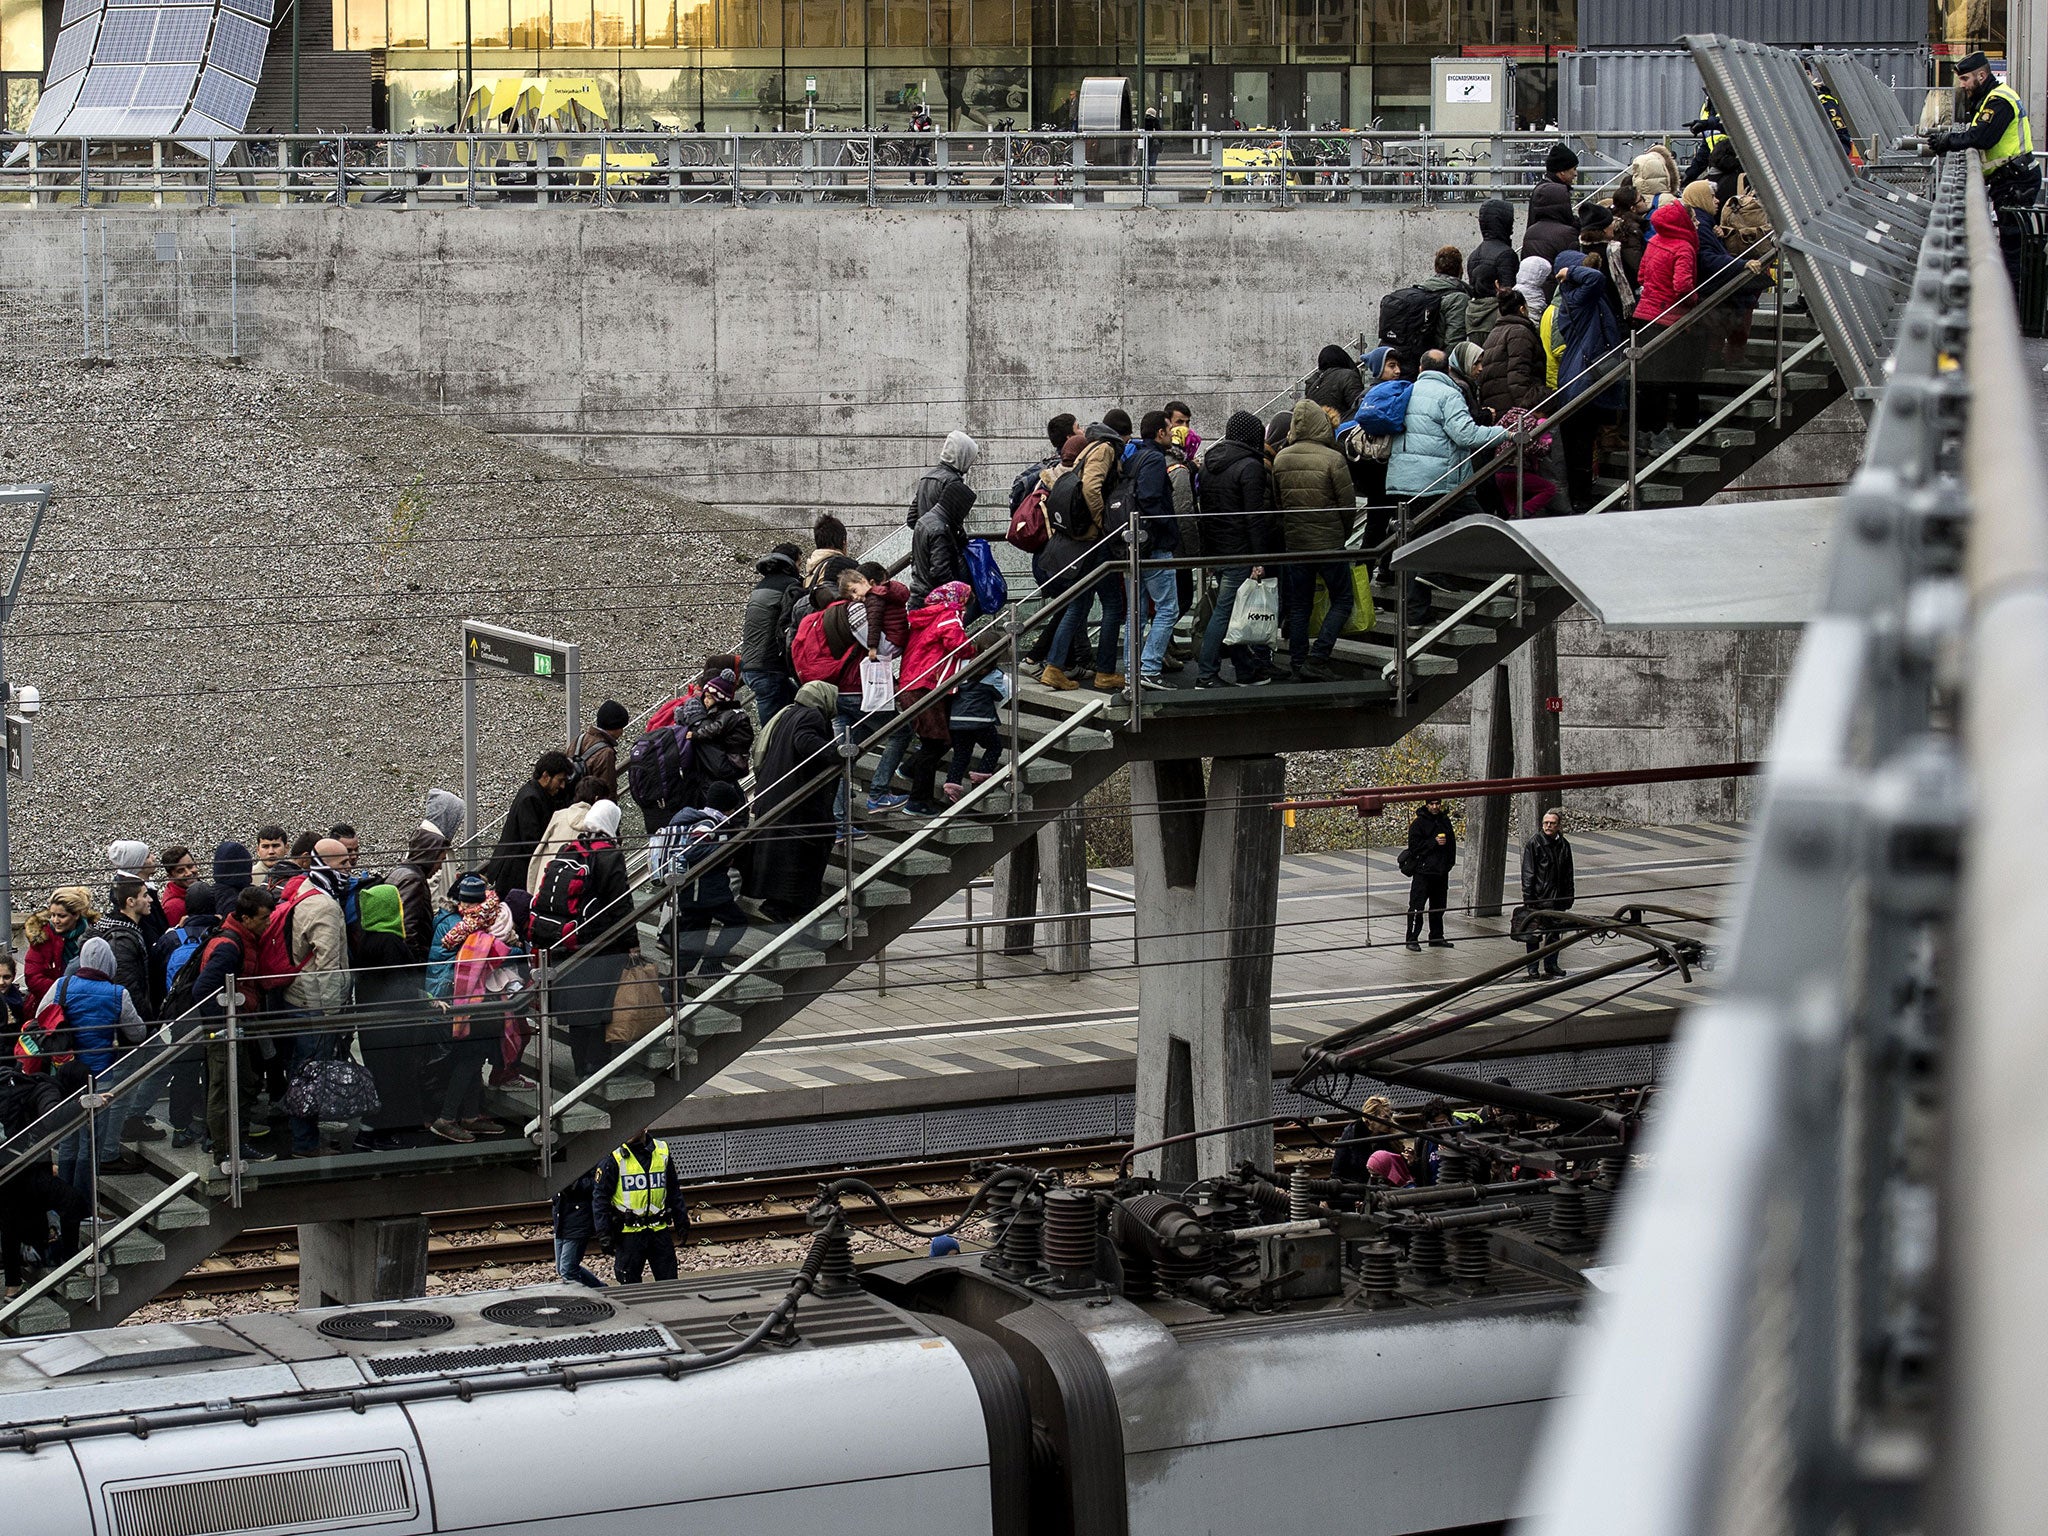 Police organise a line of refugees on the stairway leading up from the trains arriving from Denmark at the Hyllie train station outside Malmo, Sweden, in November 2015